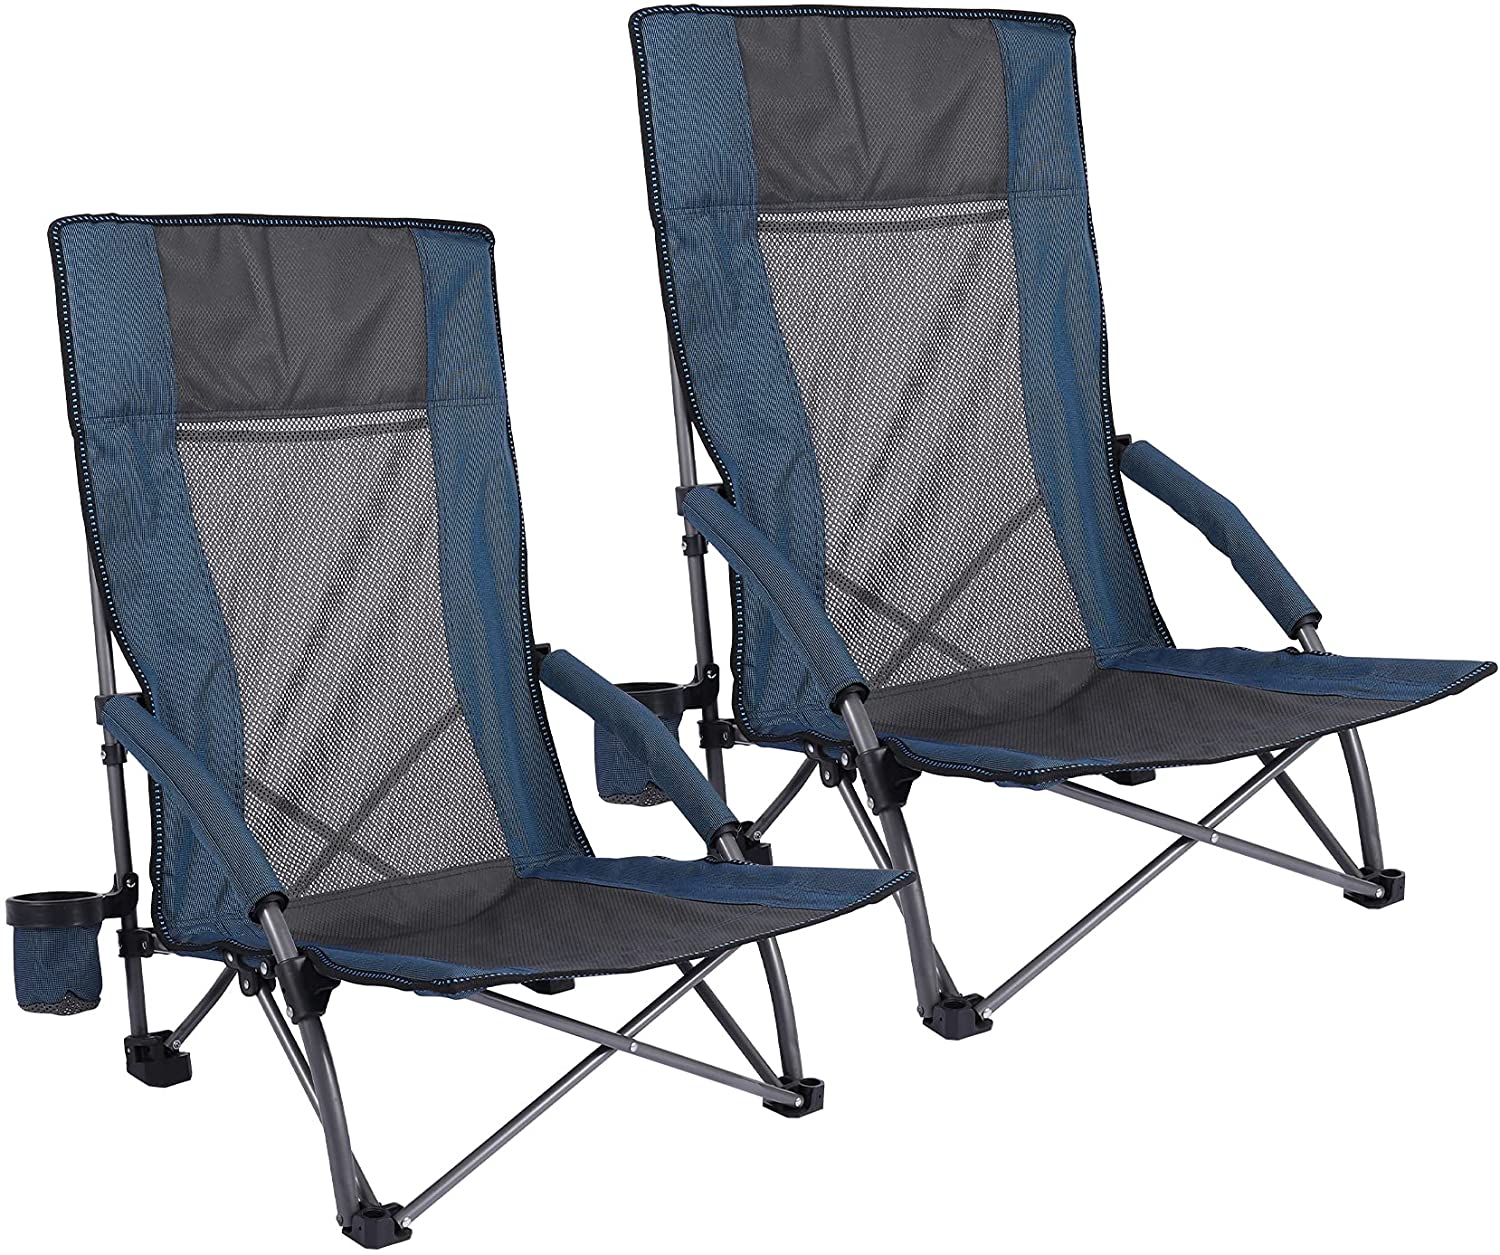 Lineslife Folding Beach Chair High Back for Adults, 2 Pack Low Seat Lightweight Concert Chairs Portable for Camping Lawn Outdoor Travel, Blue - image 1 of 7